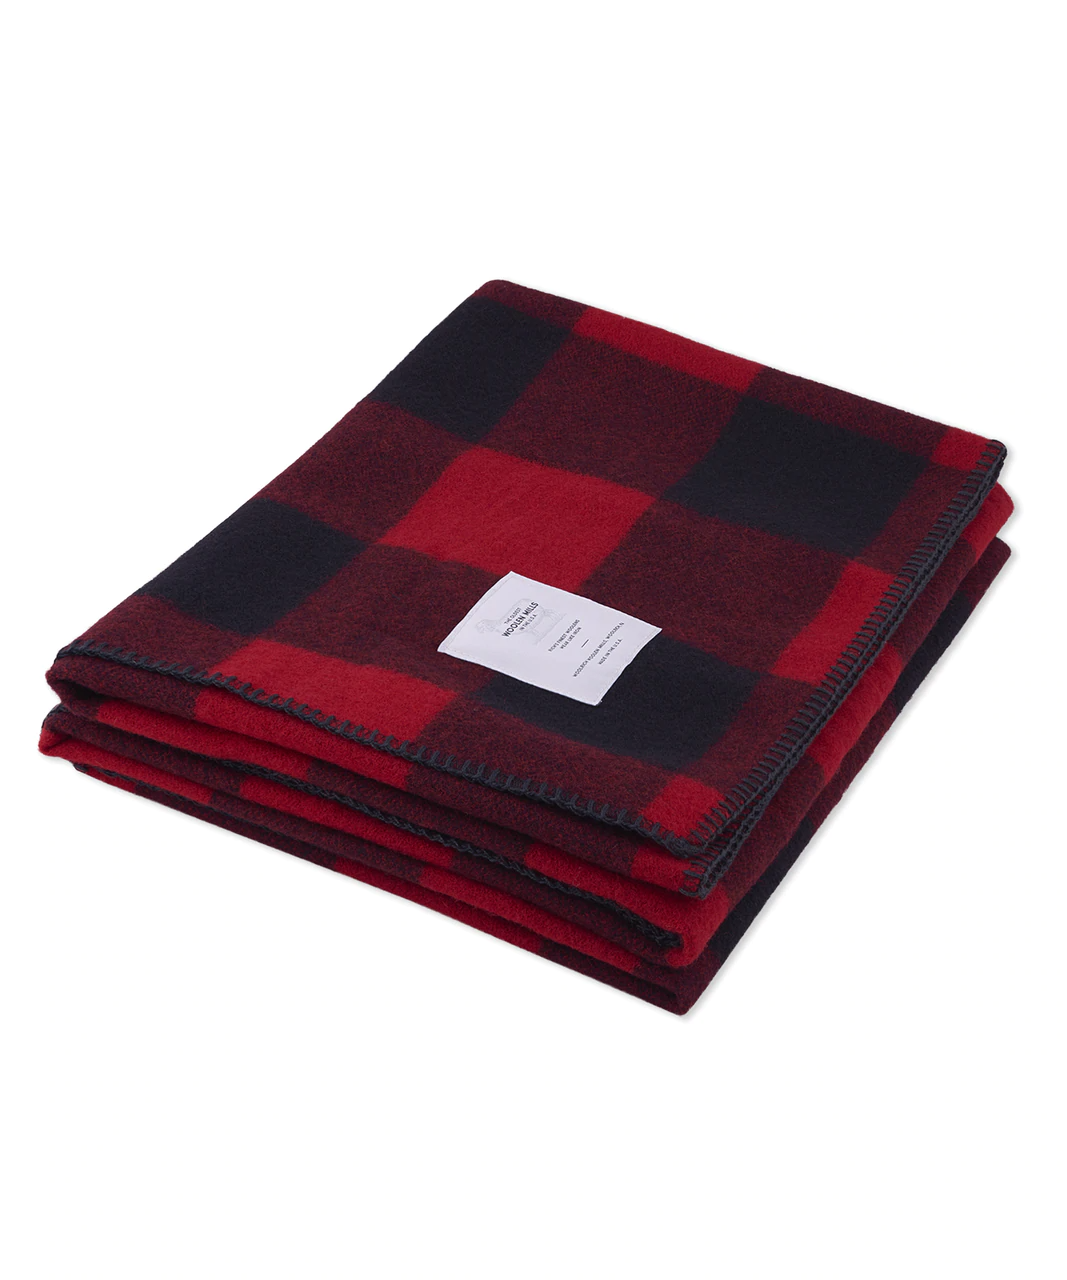 Primary image for Woolrich Rough Rider Iconic Buffalo Luxury Wool Throw Blanket (50"x60") Red